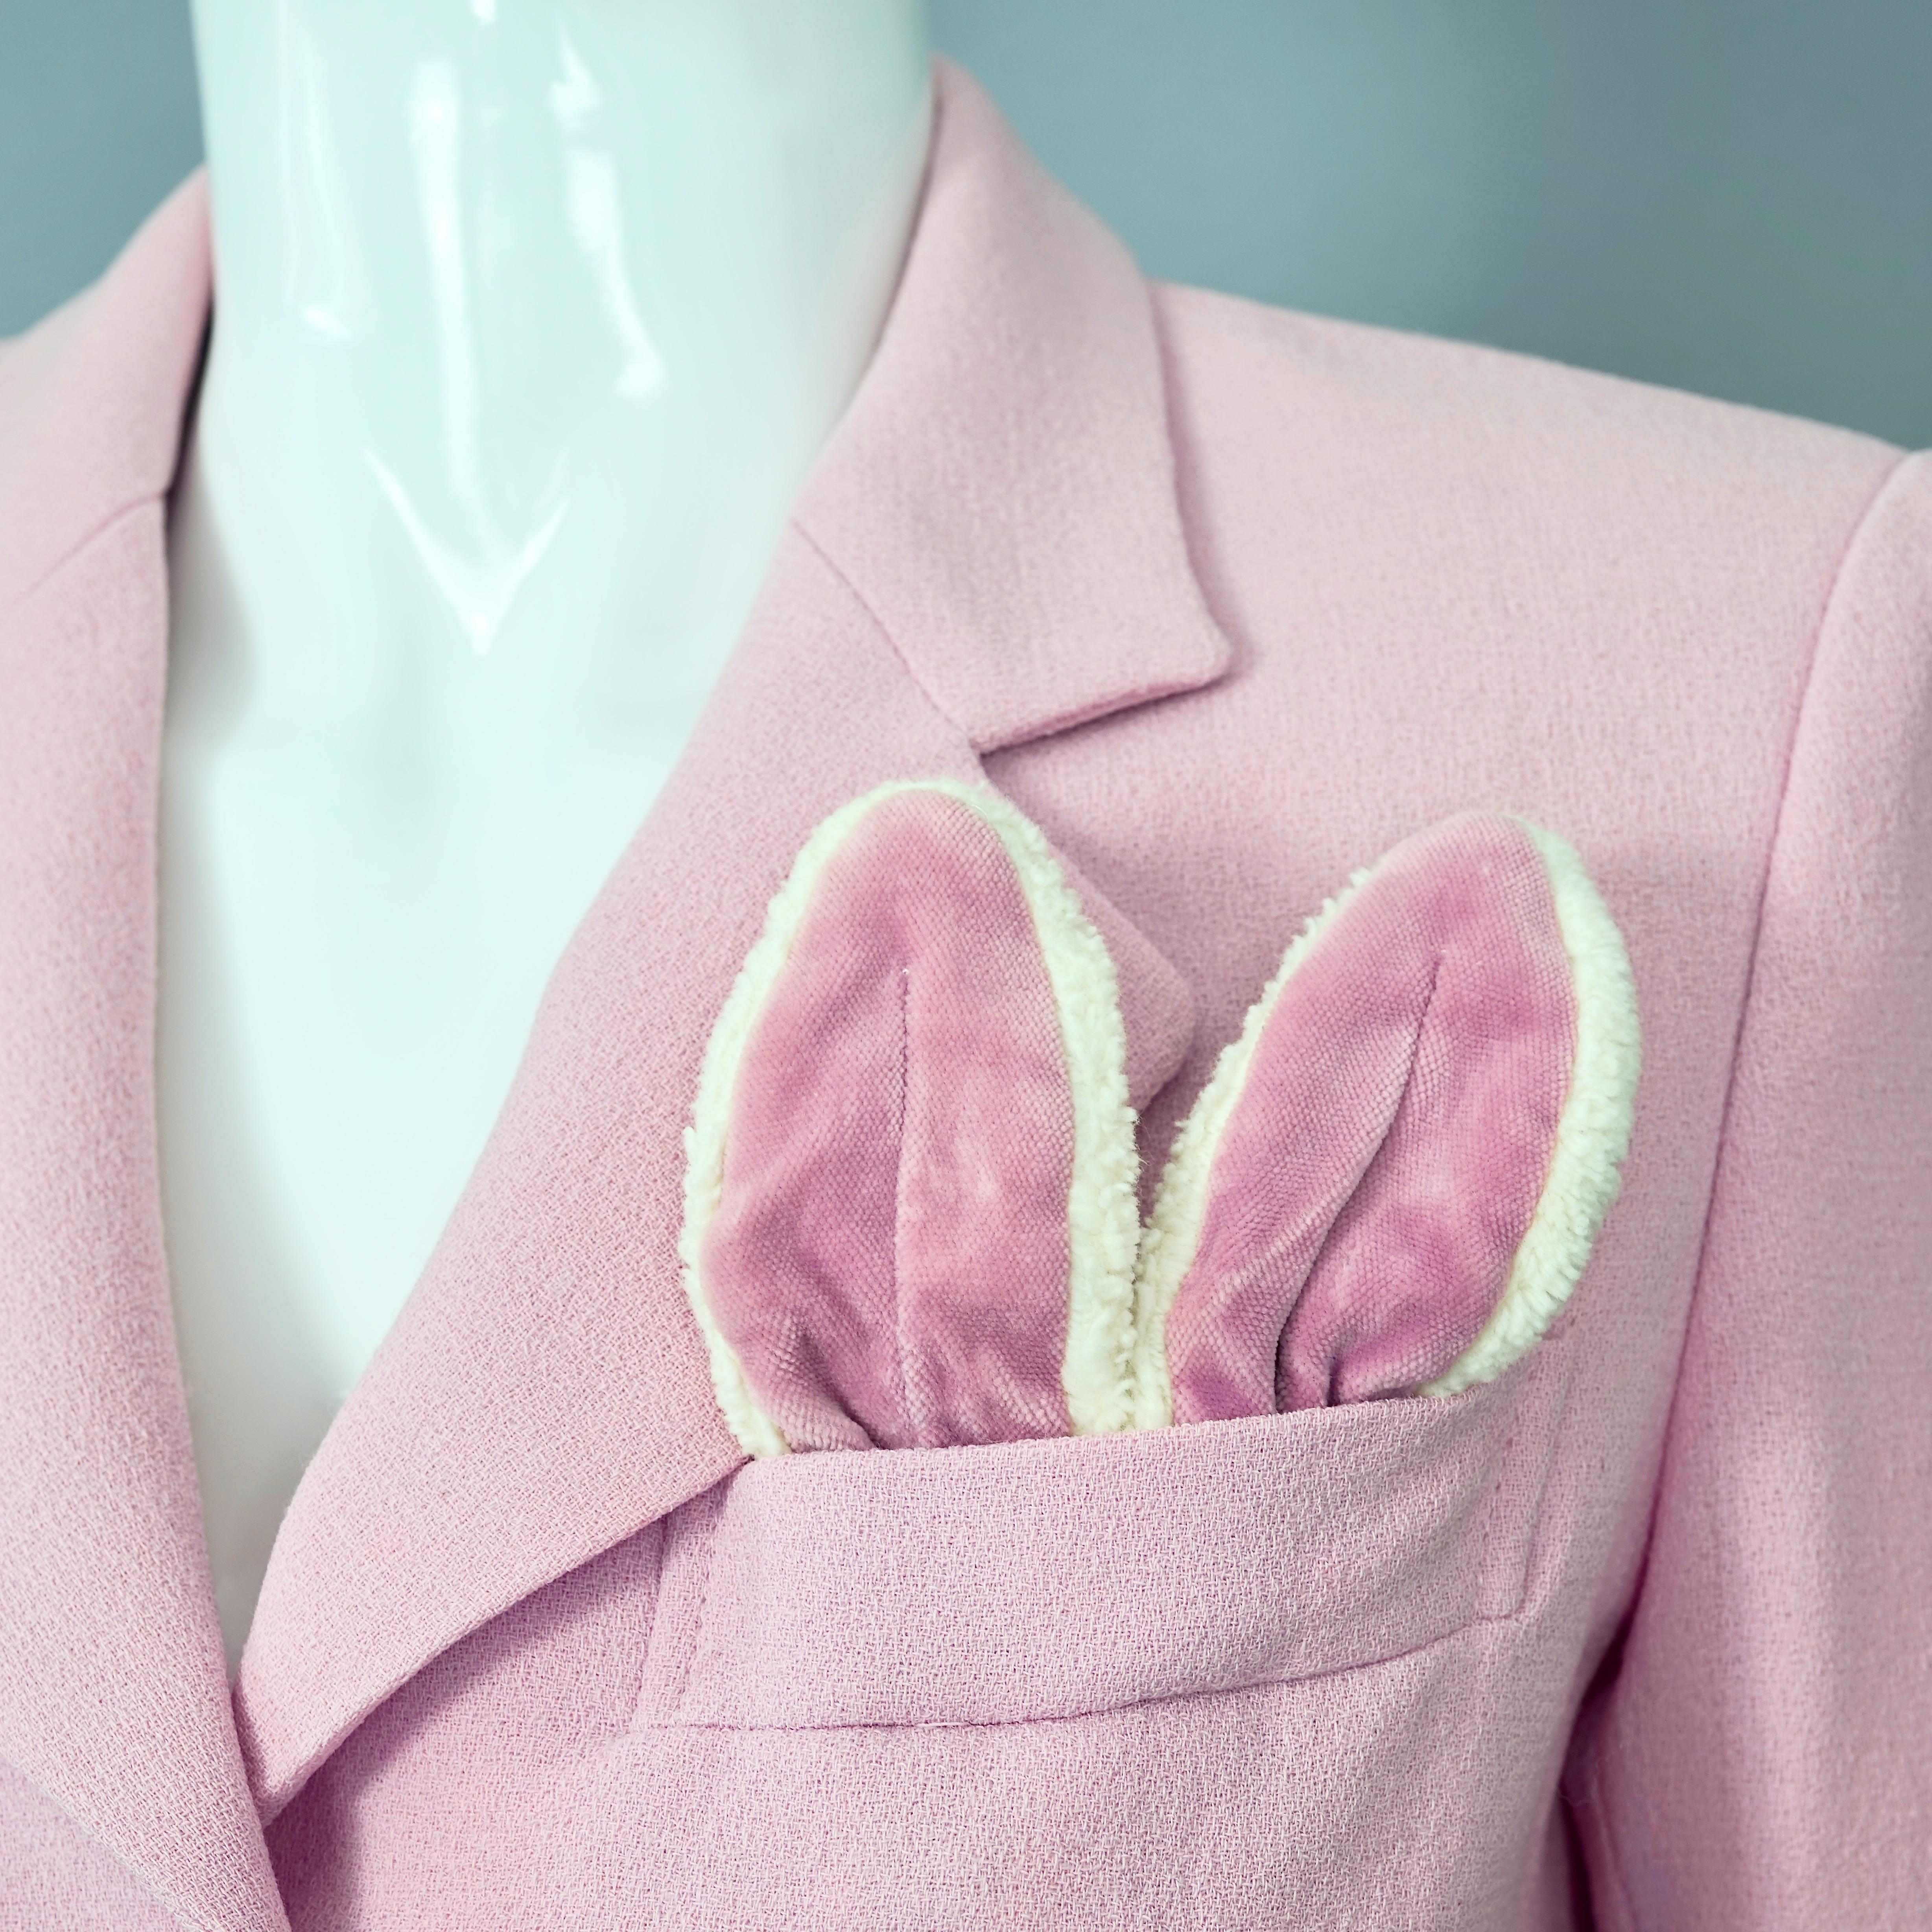 Vintage MOSCHINO CHEAP and CHIC Magician Rabbit Ears Novelty Blazer Jacket

Measurements taken laid flat, please double bust and waist:
Shoulder: 14.76 inches  (37.5 cms)
Sleeves: 22.24 inches  (56.5 cms)
Bust: 18.11 inches  (46 cms)
Waist: 16.14